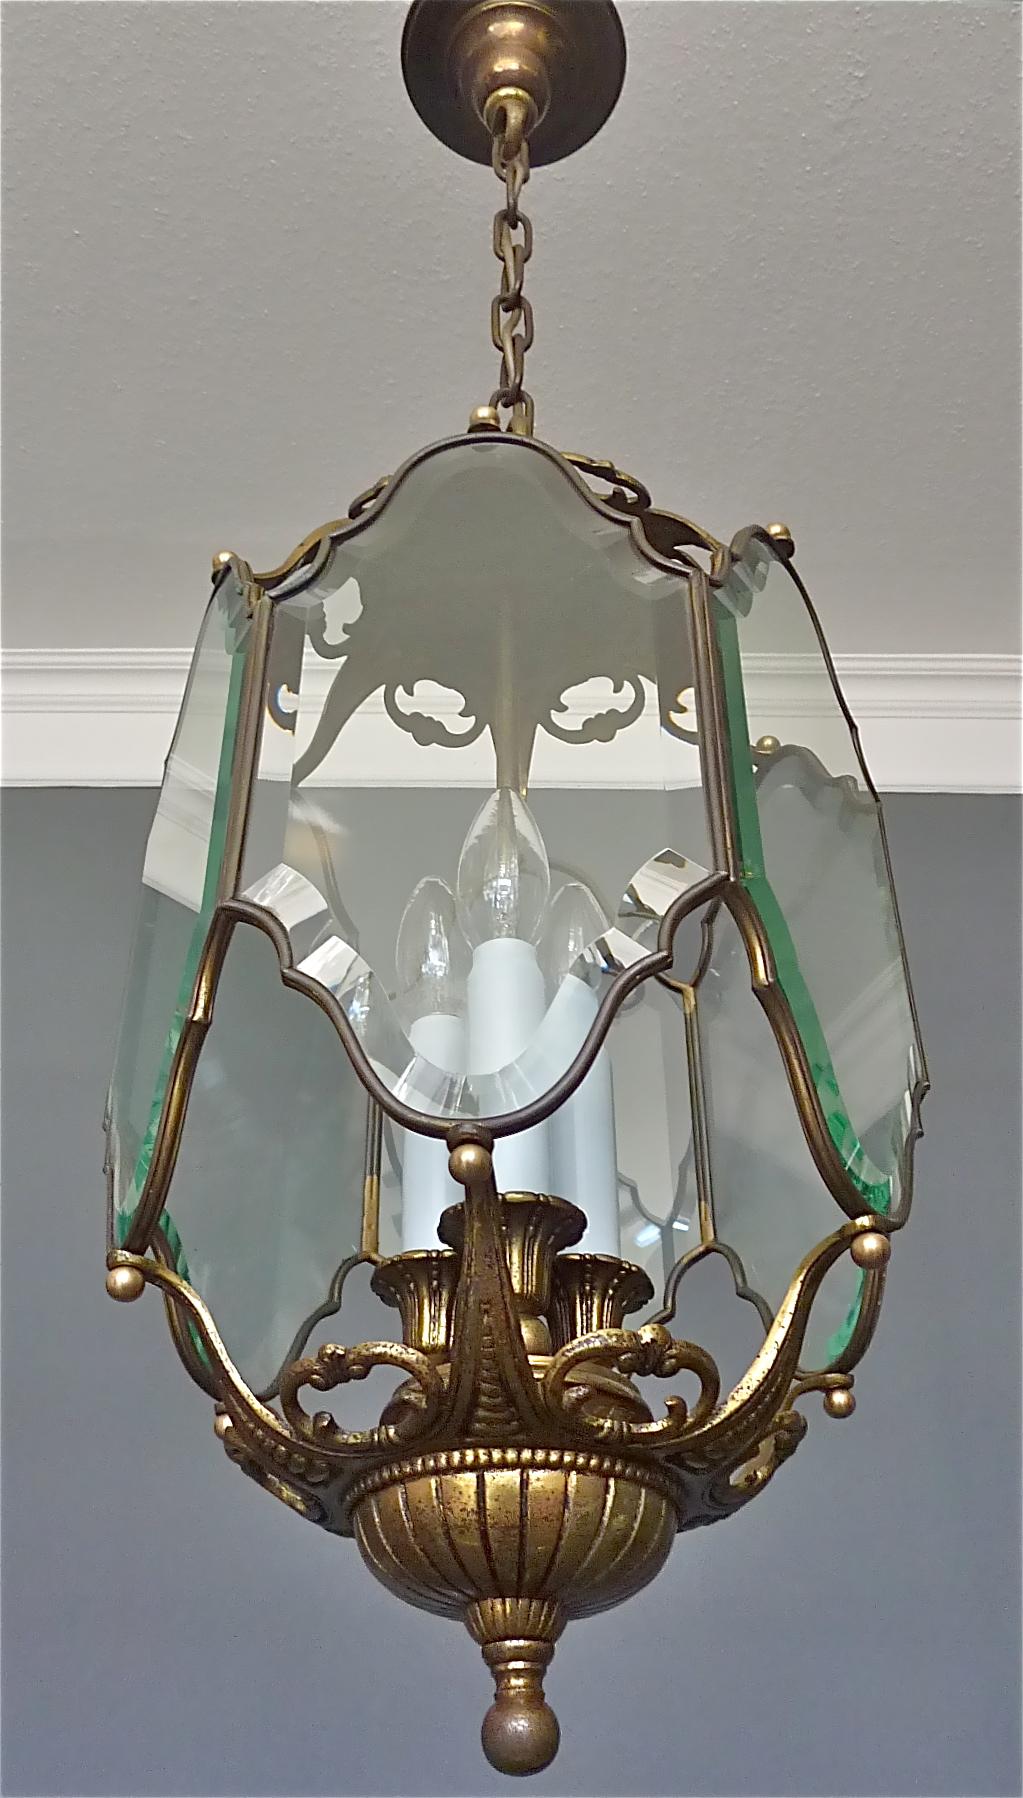 Large Antique French Lantern Lamp Faceted Crystal Glass Bronze Brass 1880 - 1900 For Sale 1